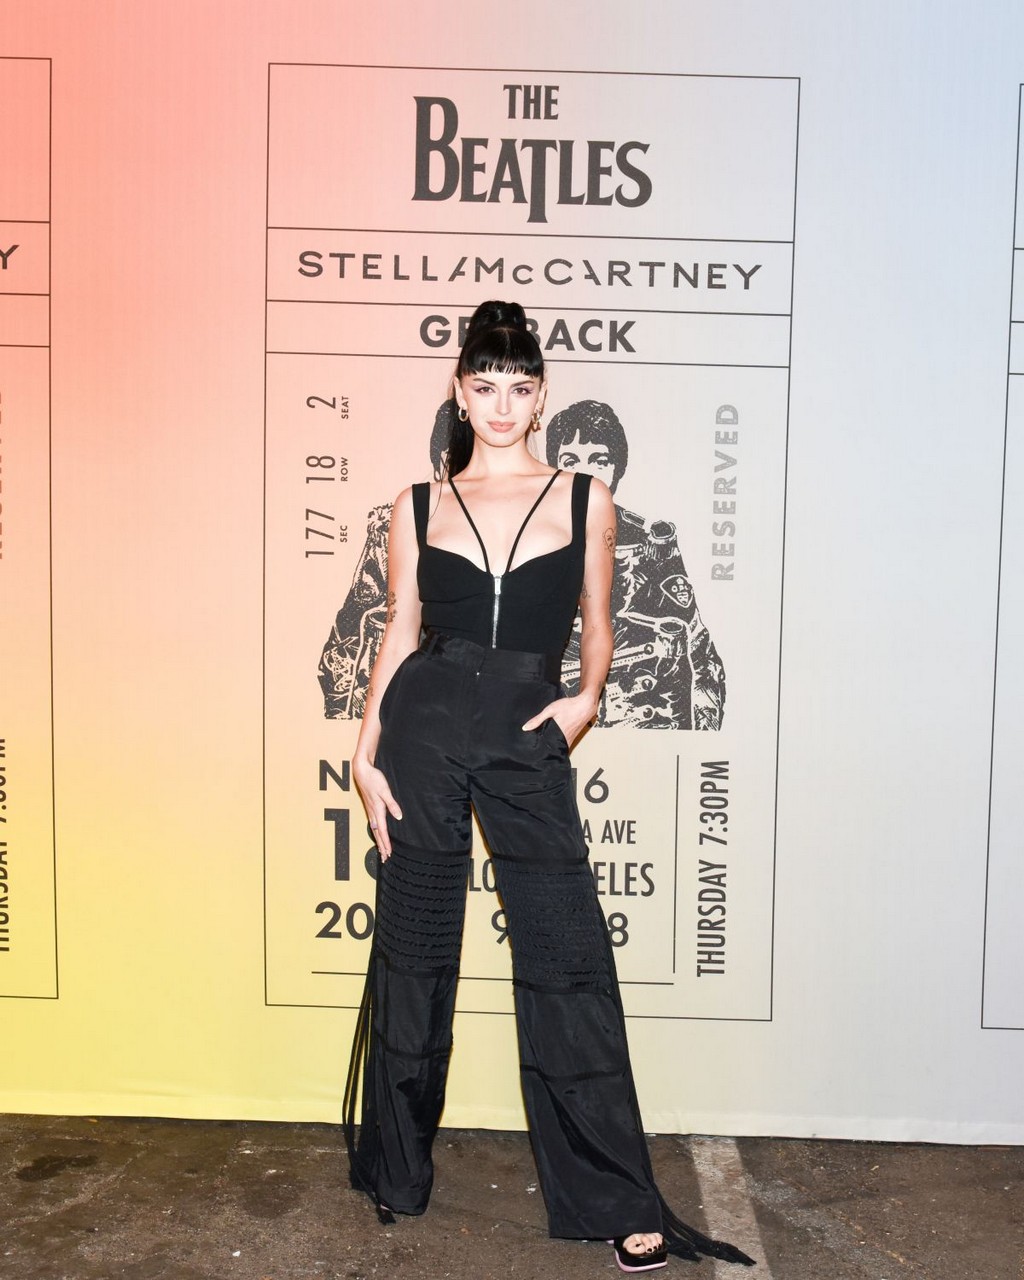 Rebecca Black Stella Mccartney X Beatles Get Back Collection Launch Los Angeles